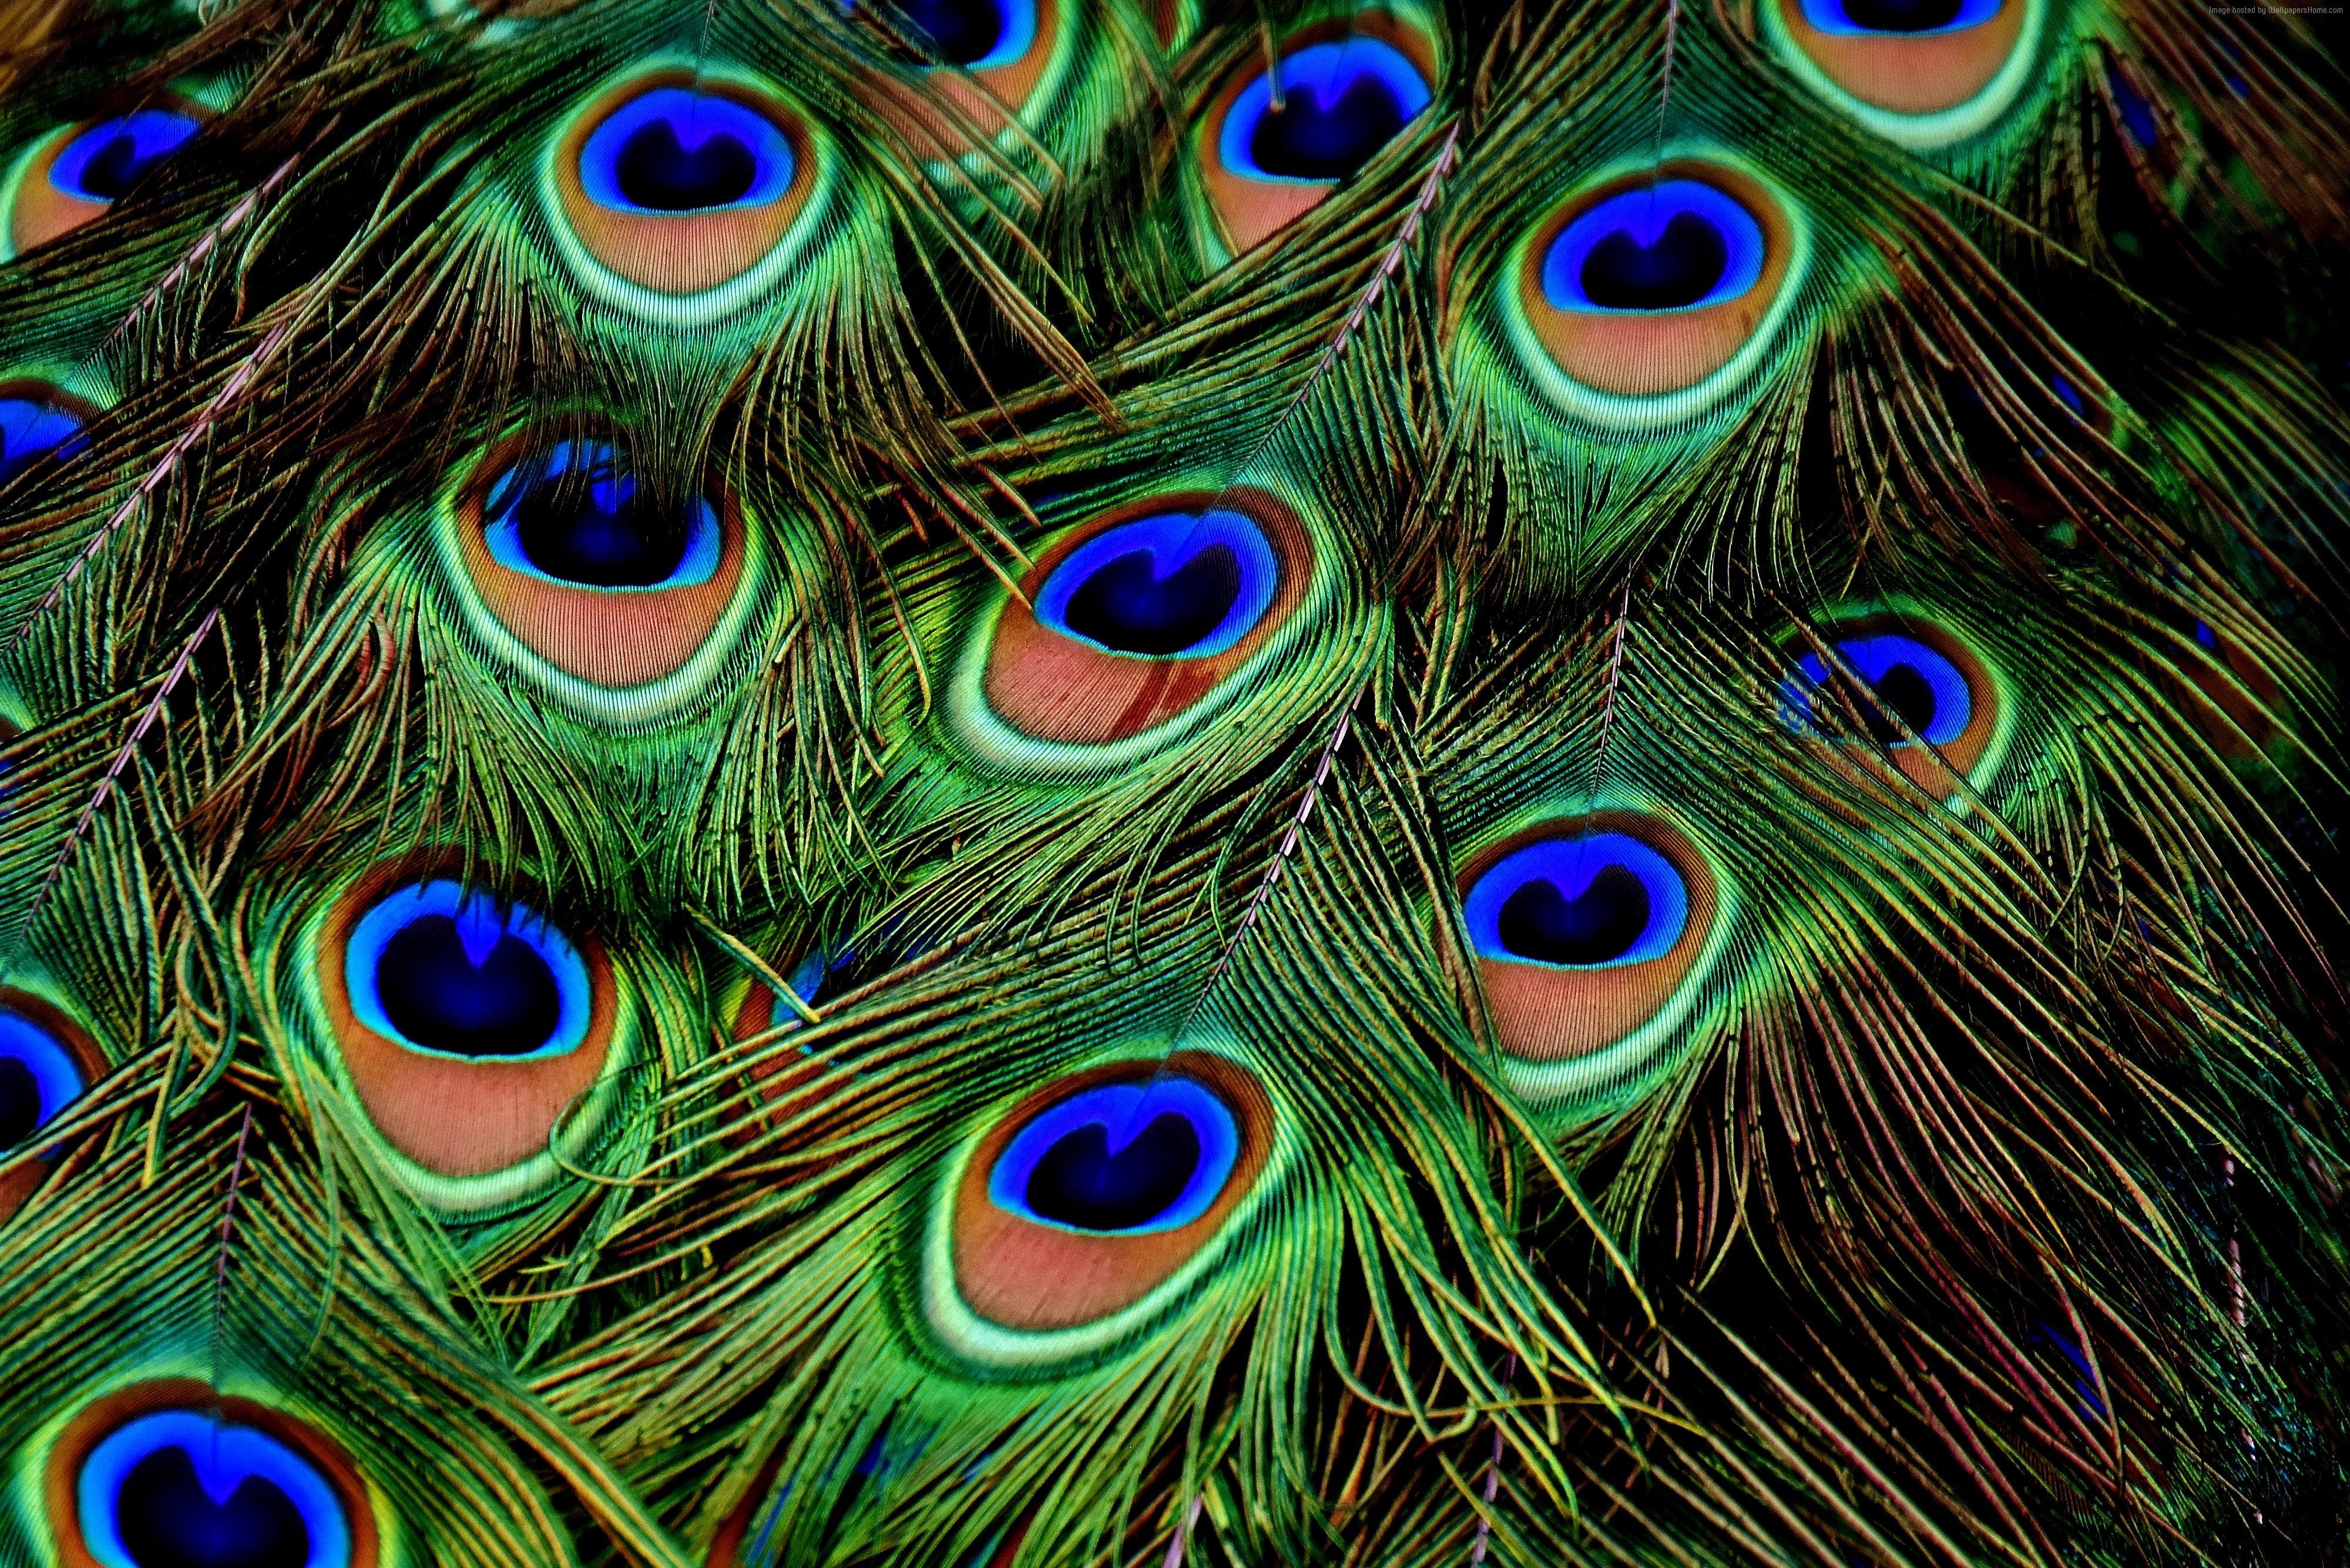 HD wallpaper: Peacock, feathers